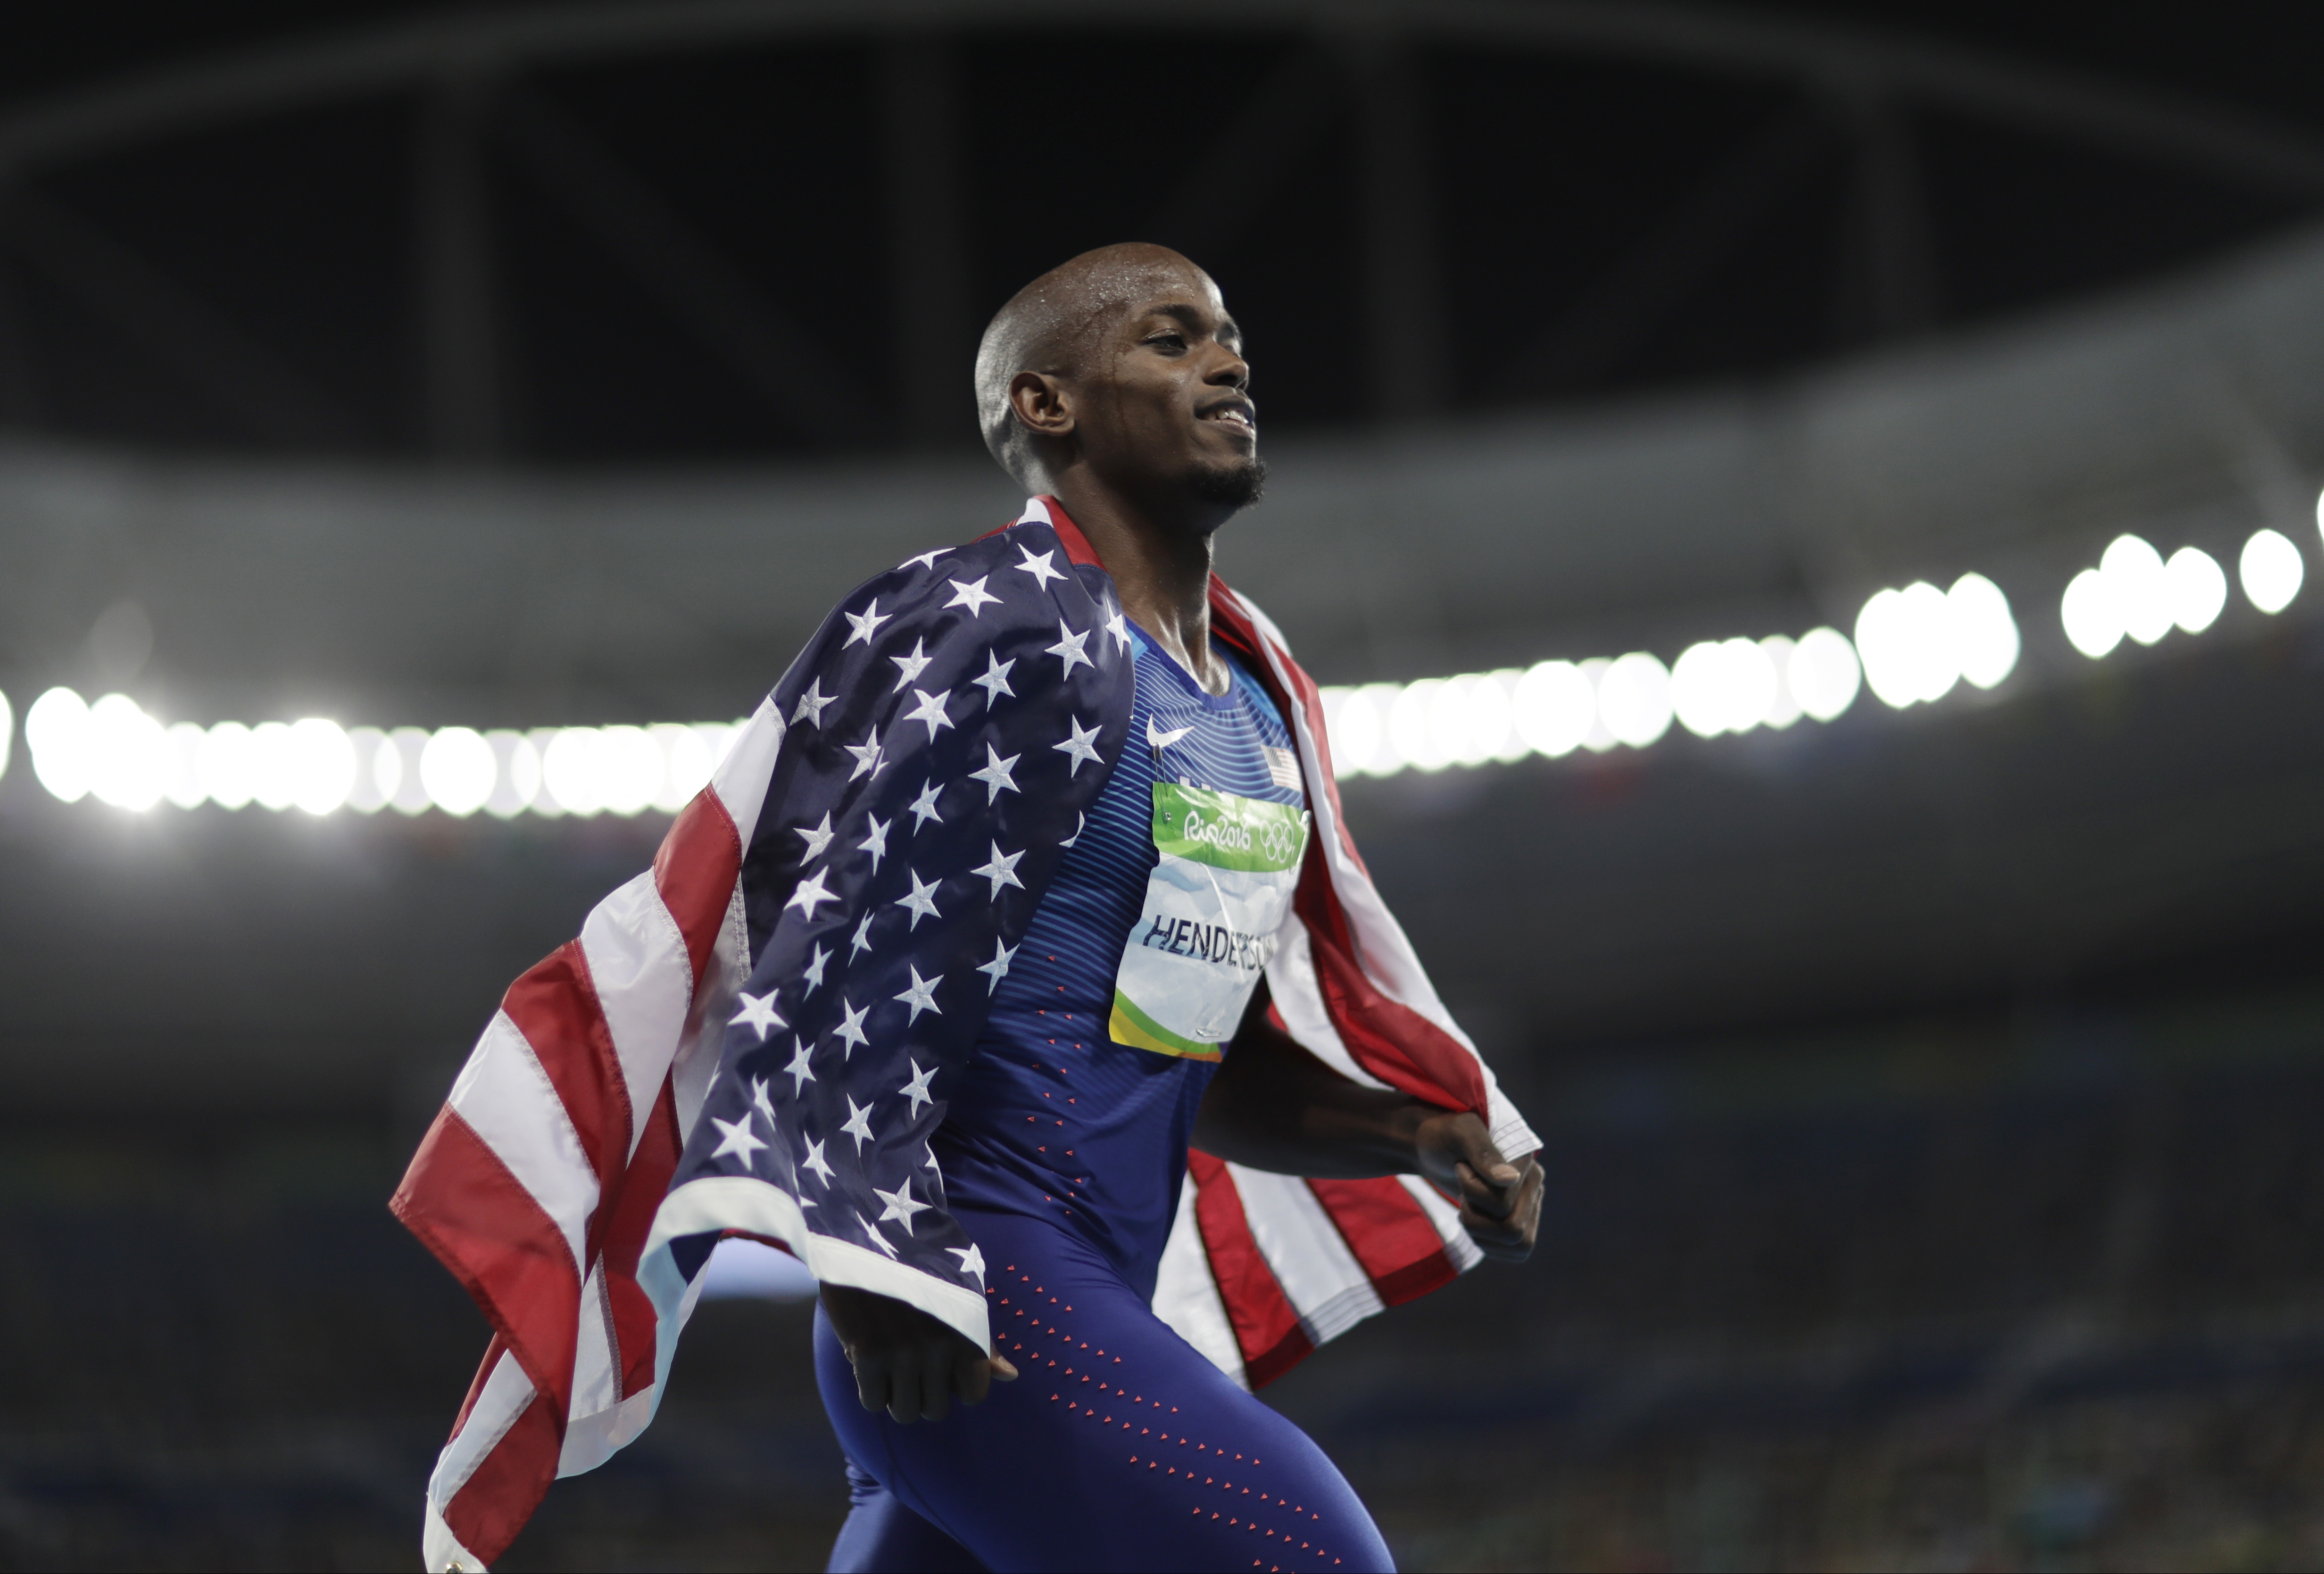 United States' Jeff Henderson celebrates winning the gold medal in the men's long jump during the athletics competitions of the 2016 Summer Olympics at the Olympic stadium in Rio de Janeiro, Brazil, Saturday, Aug. 13, 2016. AP